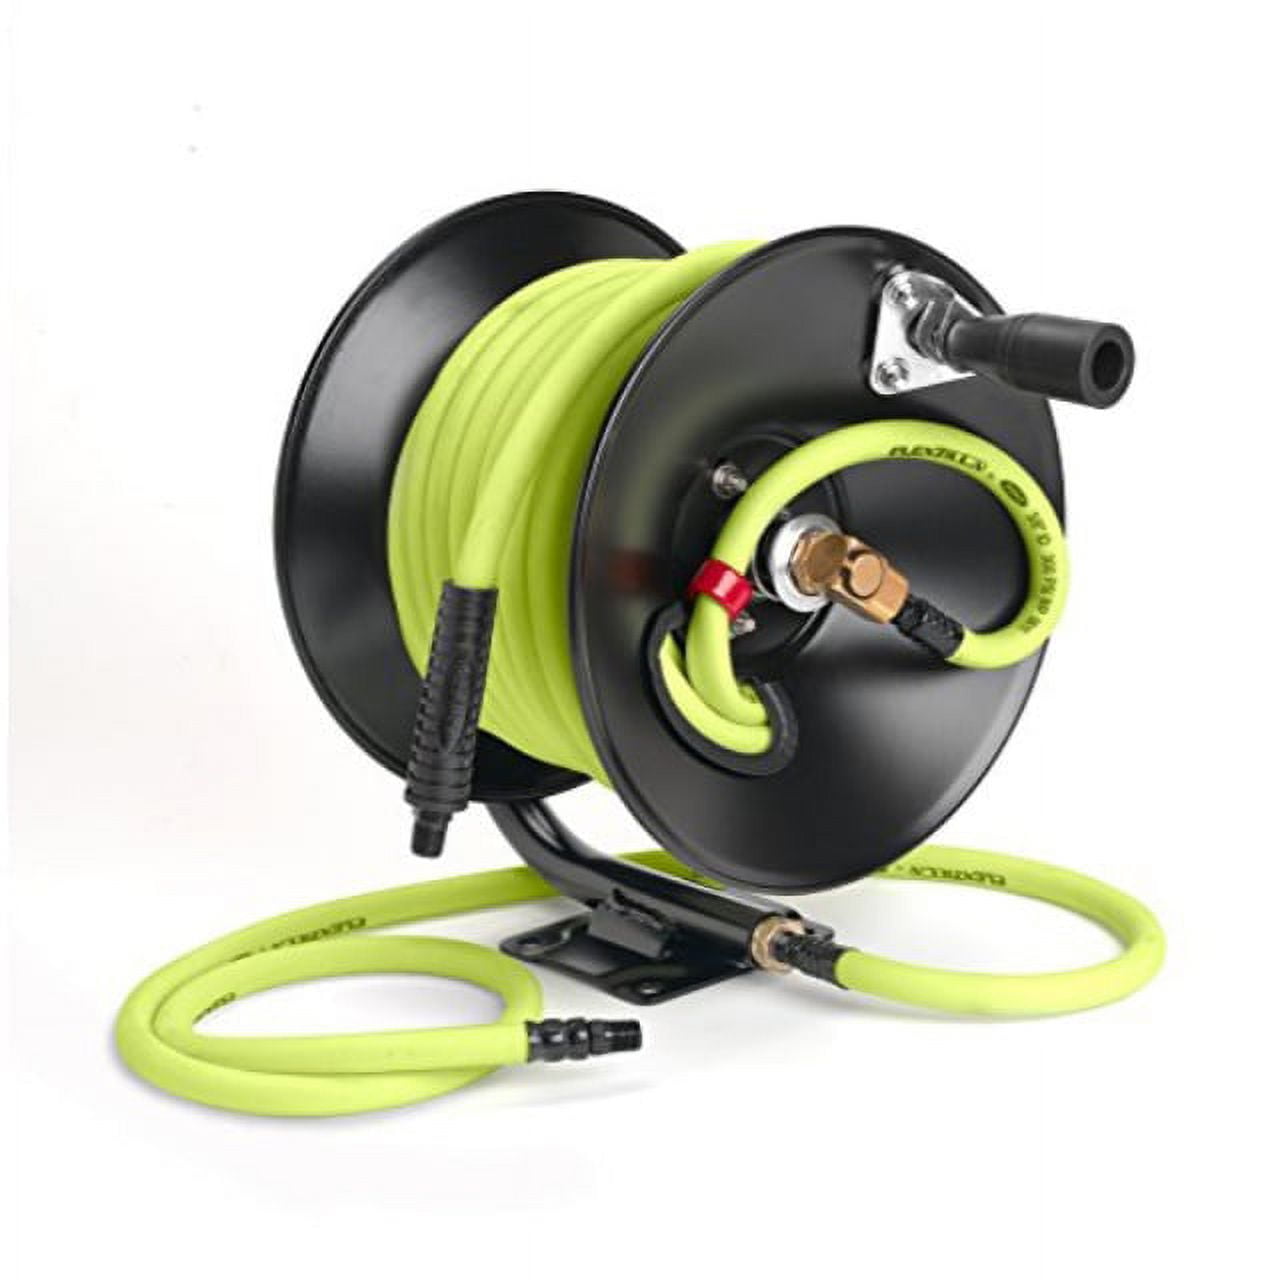 Ironton Compact Air Hose Reel, With 3/8in. x 50ft. Hybrid Polymer Hose,  Max. 300 PSI